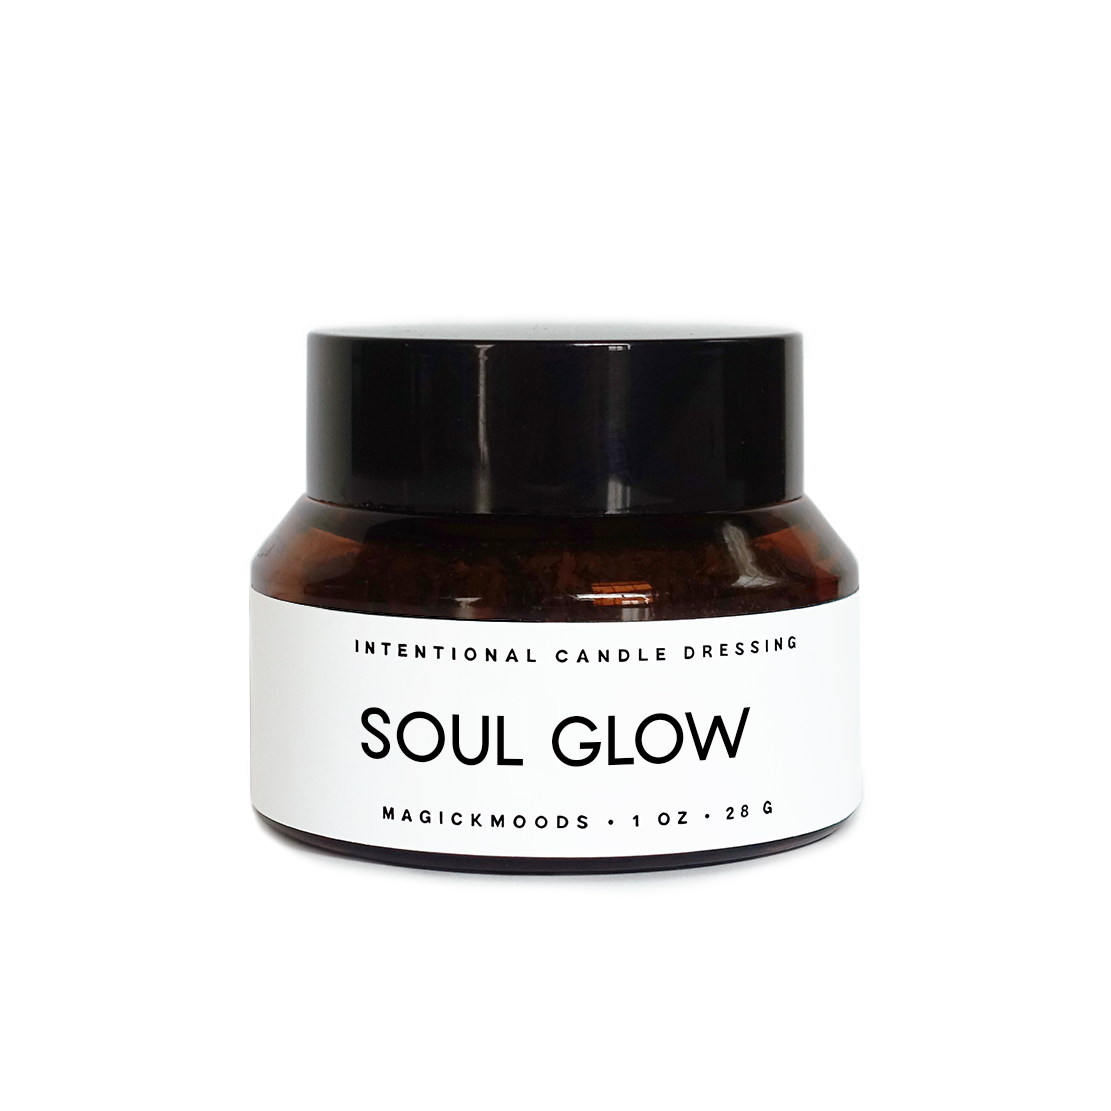 Soul Glow Candle Dressing